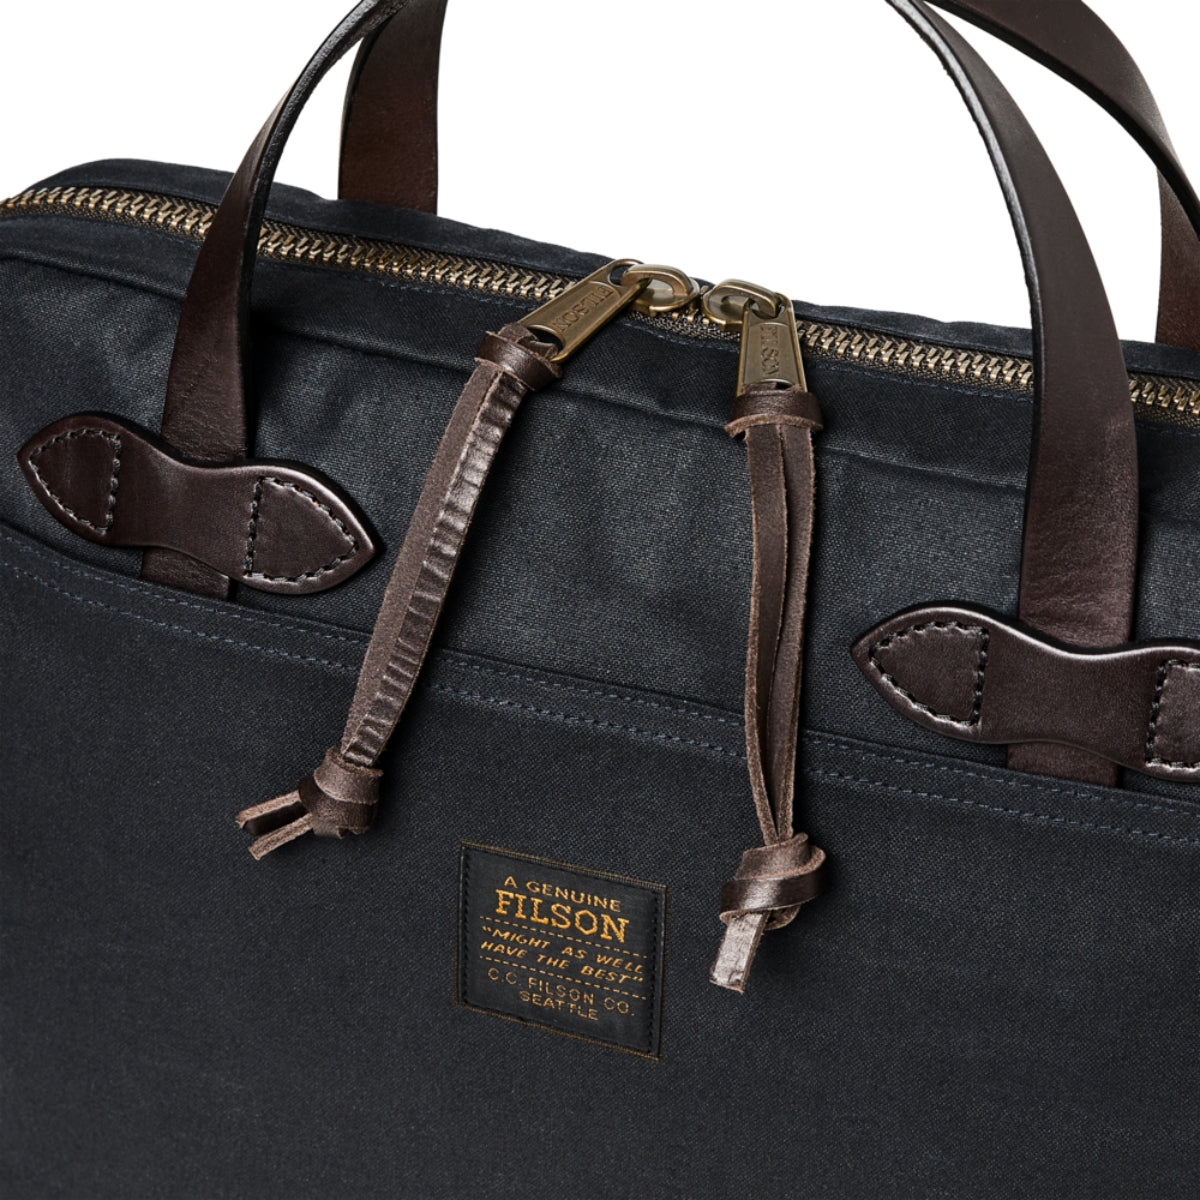 Filson Compact Briefcase in Navy